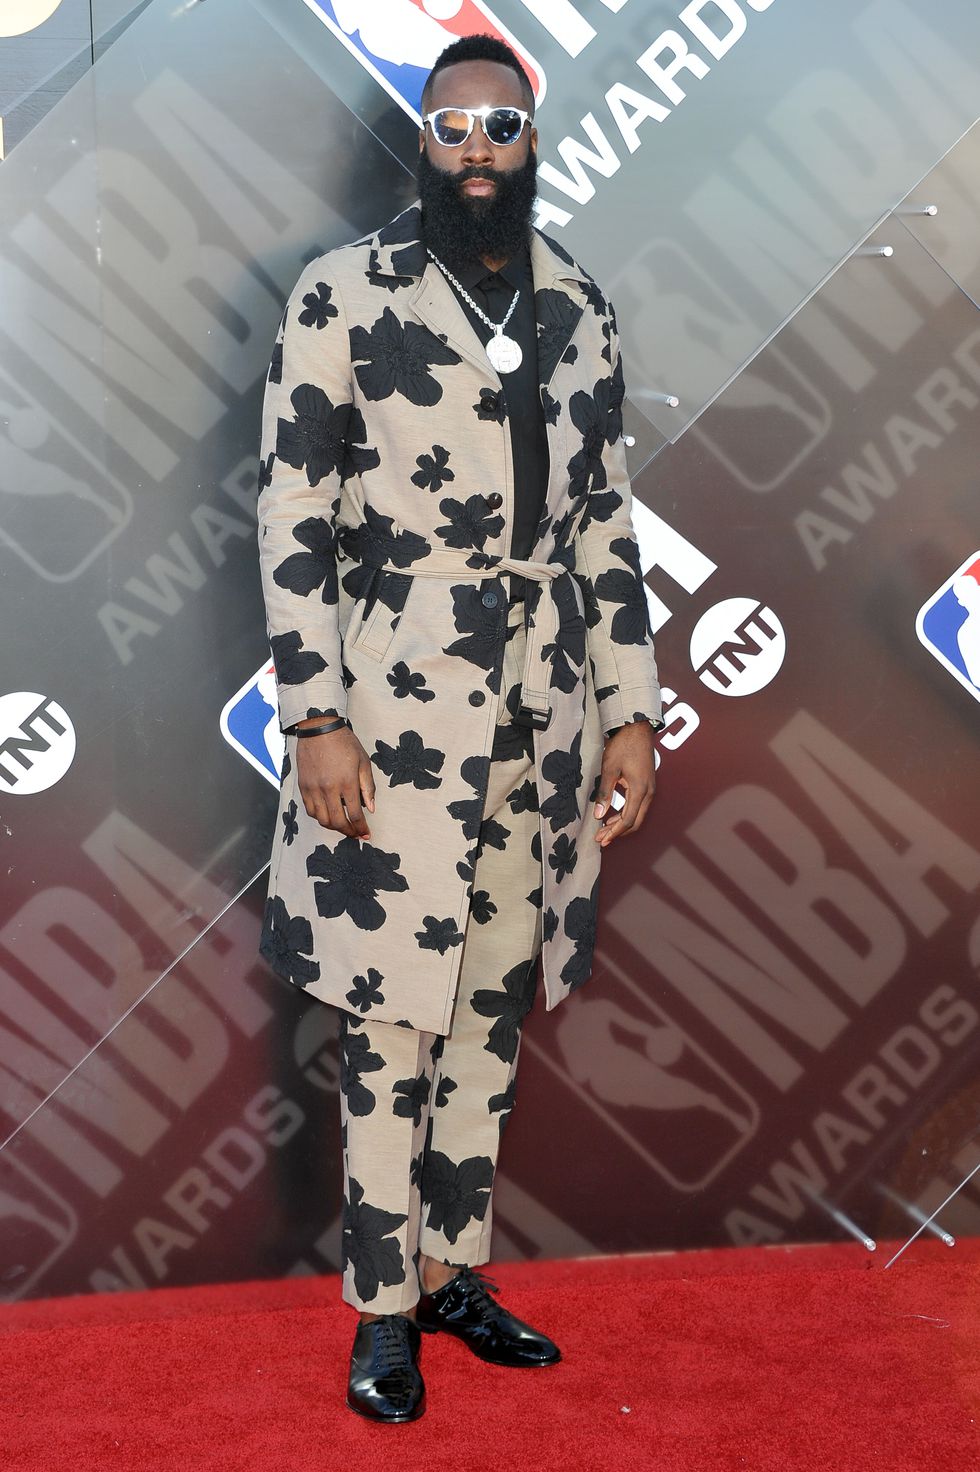 And Our 2018 NBA Awards Style Awards Go to  JaVale McGee's Pants and  Whatever Crazy Thing James Harden Was Wearing